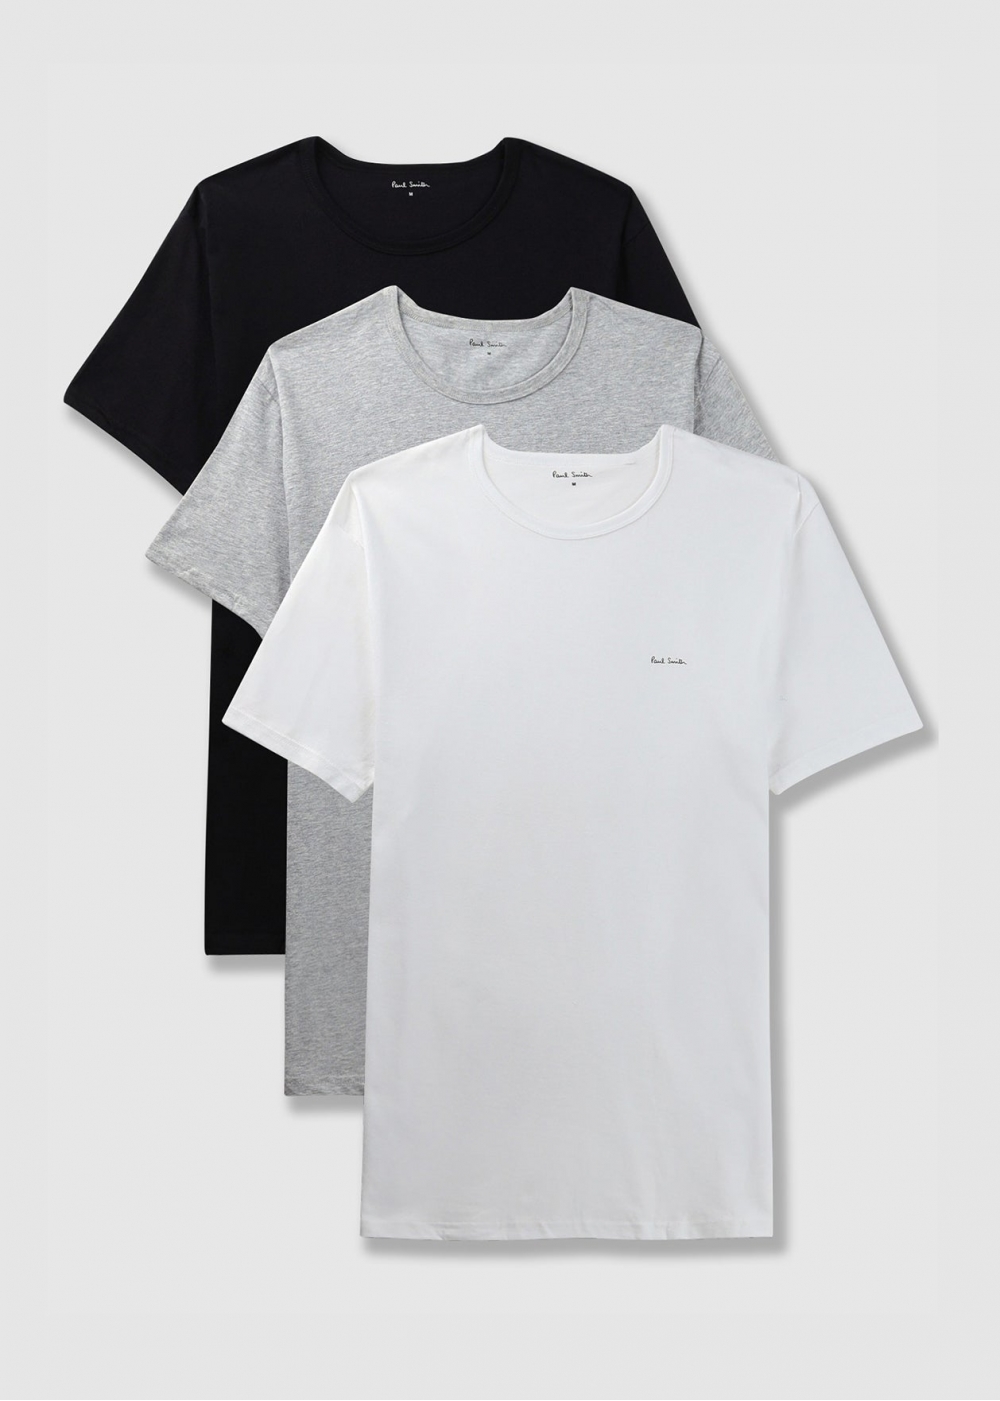 Paul Smith Mens T Shirt 3 Pack In Multicolour